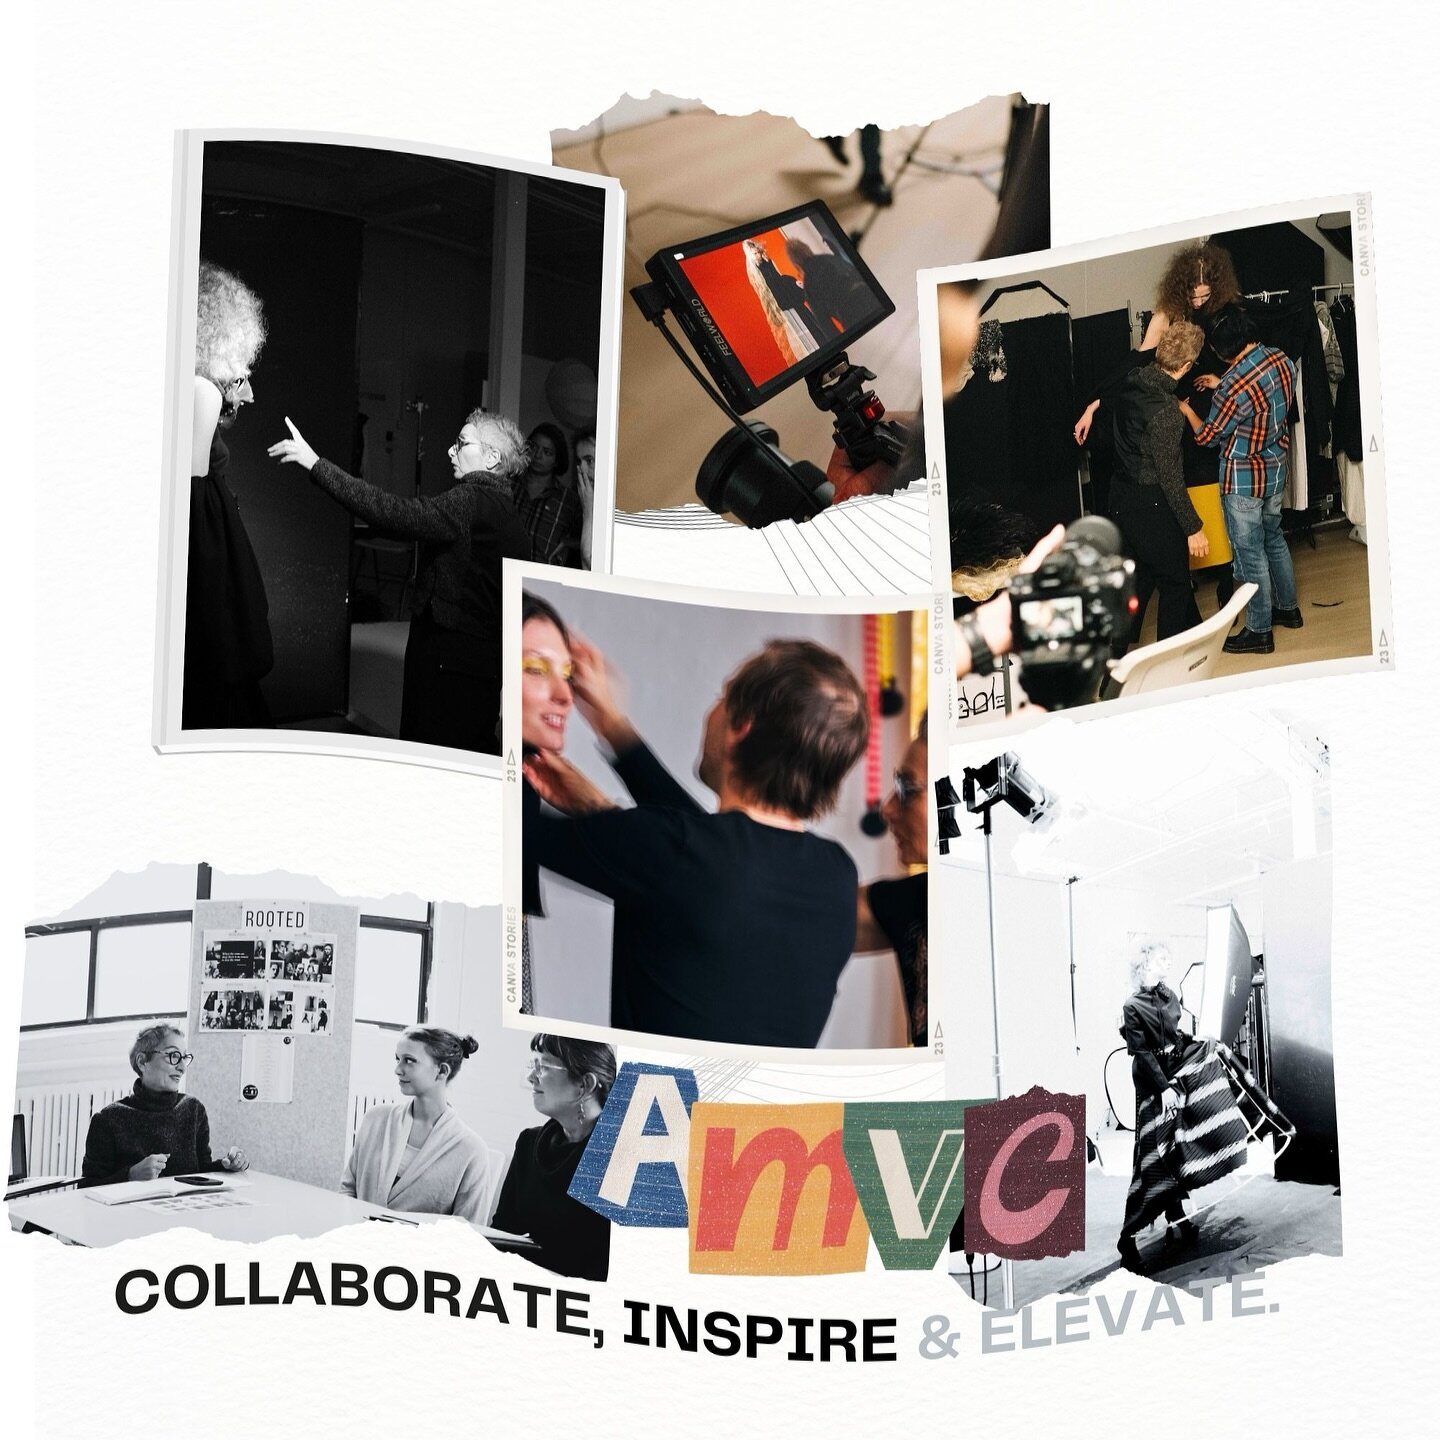 🌟 Our mission at AMVC STUDIO is simple yet profound: COLLABORATE, INSPIRE, and ELEVATE.
Led by Arline Malakian, with 30+ years of experience, we&rsquo;re dedicated to excellence in serving for all your marketing &amp; branding visual needs. From con